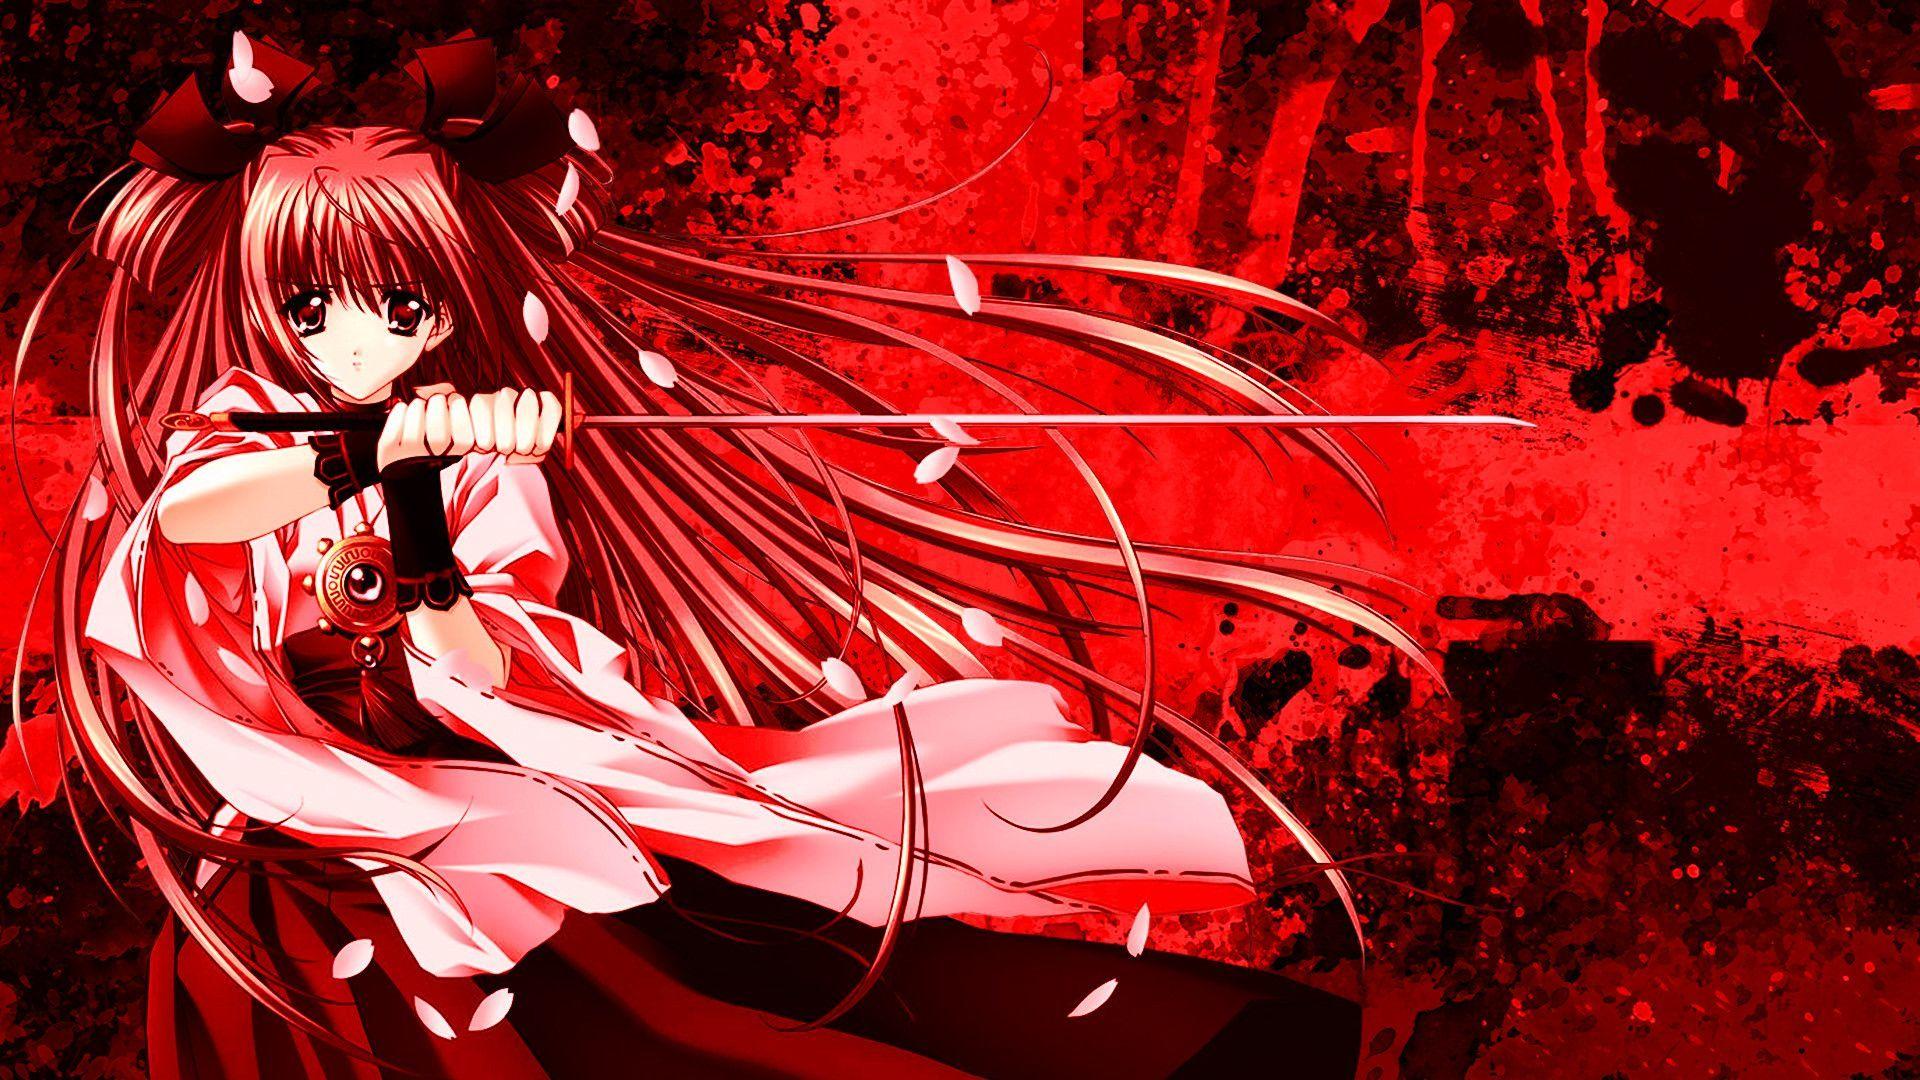 Black and Red Anime Wallpapers - Top Free Black and Red Anime